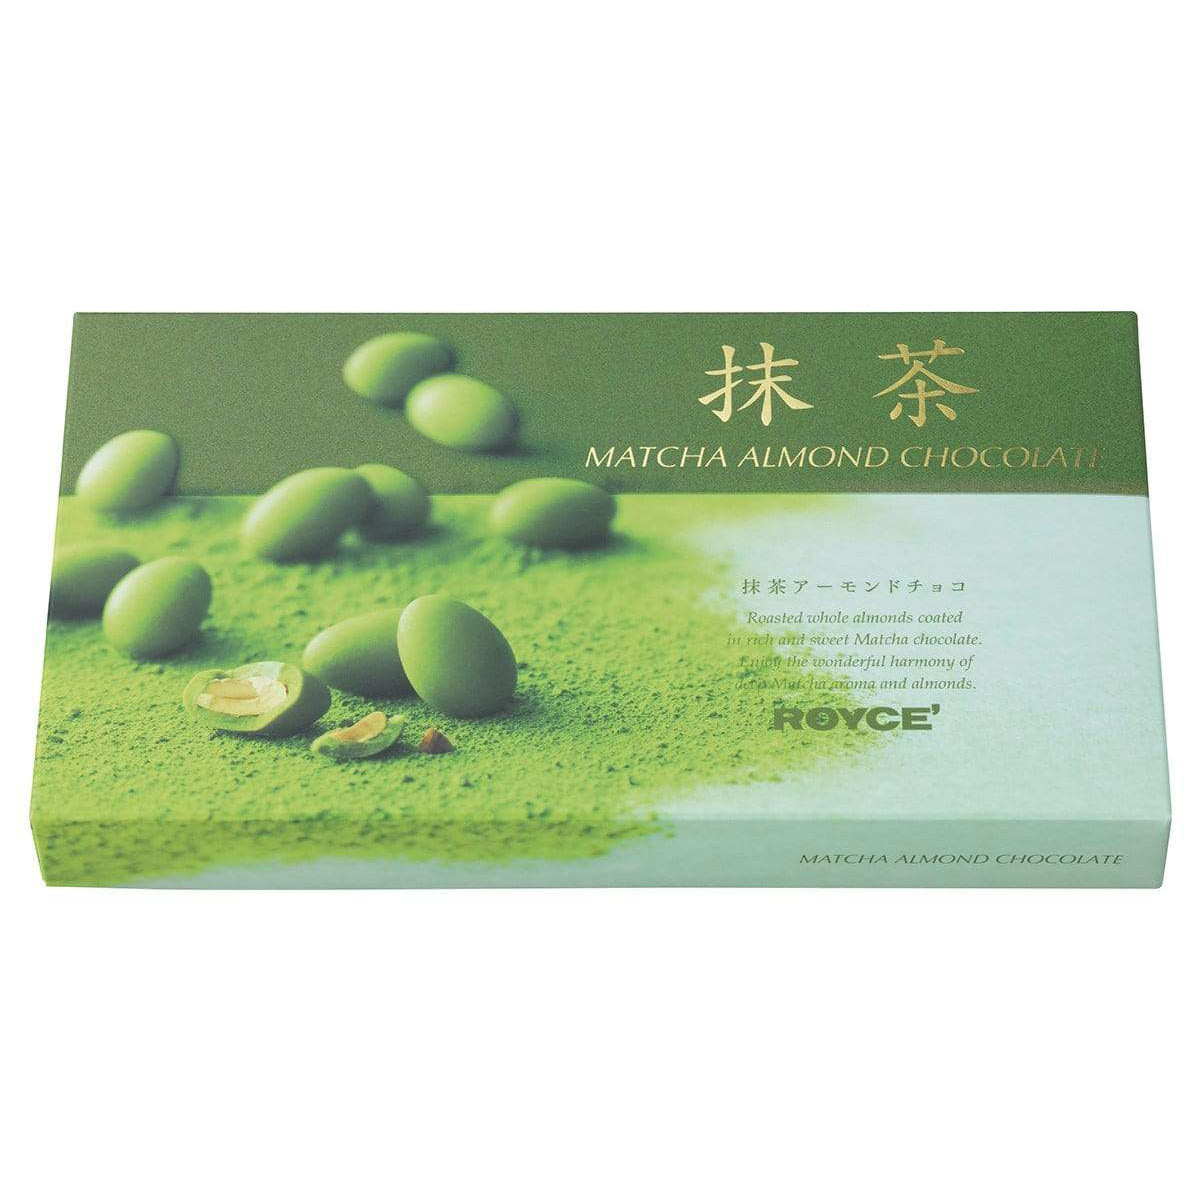 ROYCE' Chocolate - Matcha Almond Chocolate - Image shows a box in different green hues with pictures of green chocolate-covered almonds. Text in box says Matcha Almond Chocolate Roasted whole almonds coated in rich and sweet Matcha chocolate. Enjoy the wonderful harmony of Matcha aroma and almonds. ROYCE'. Text on bottom says Matcha Almond Chocolate.